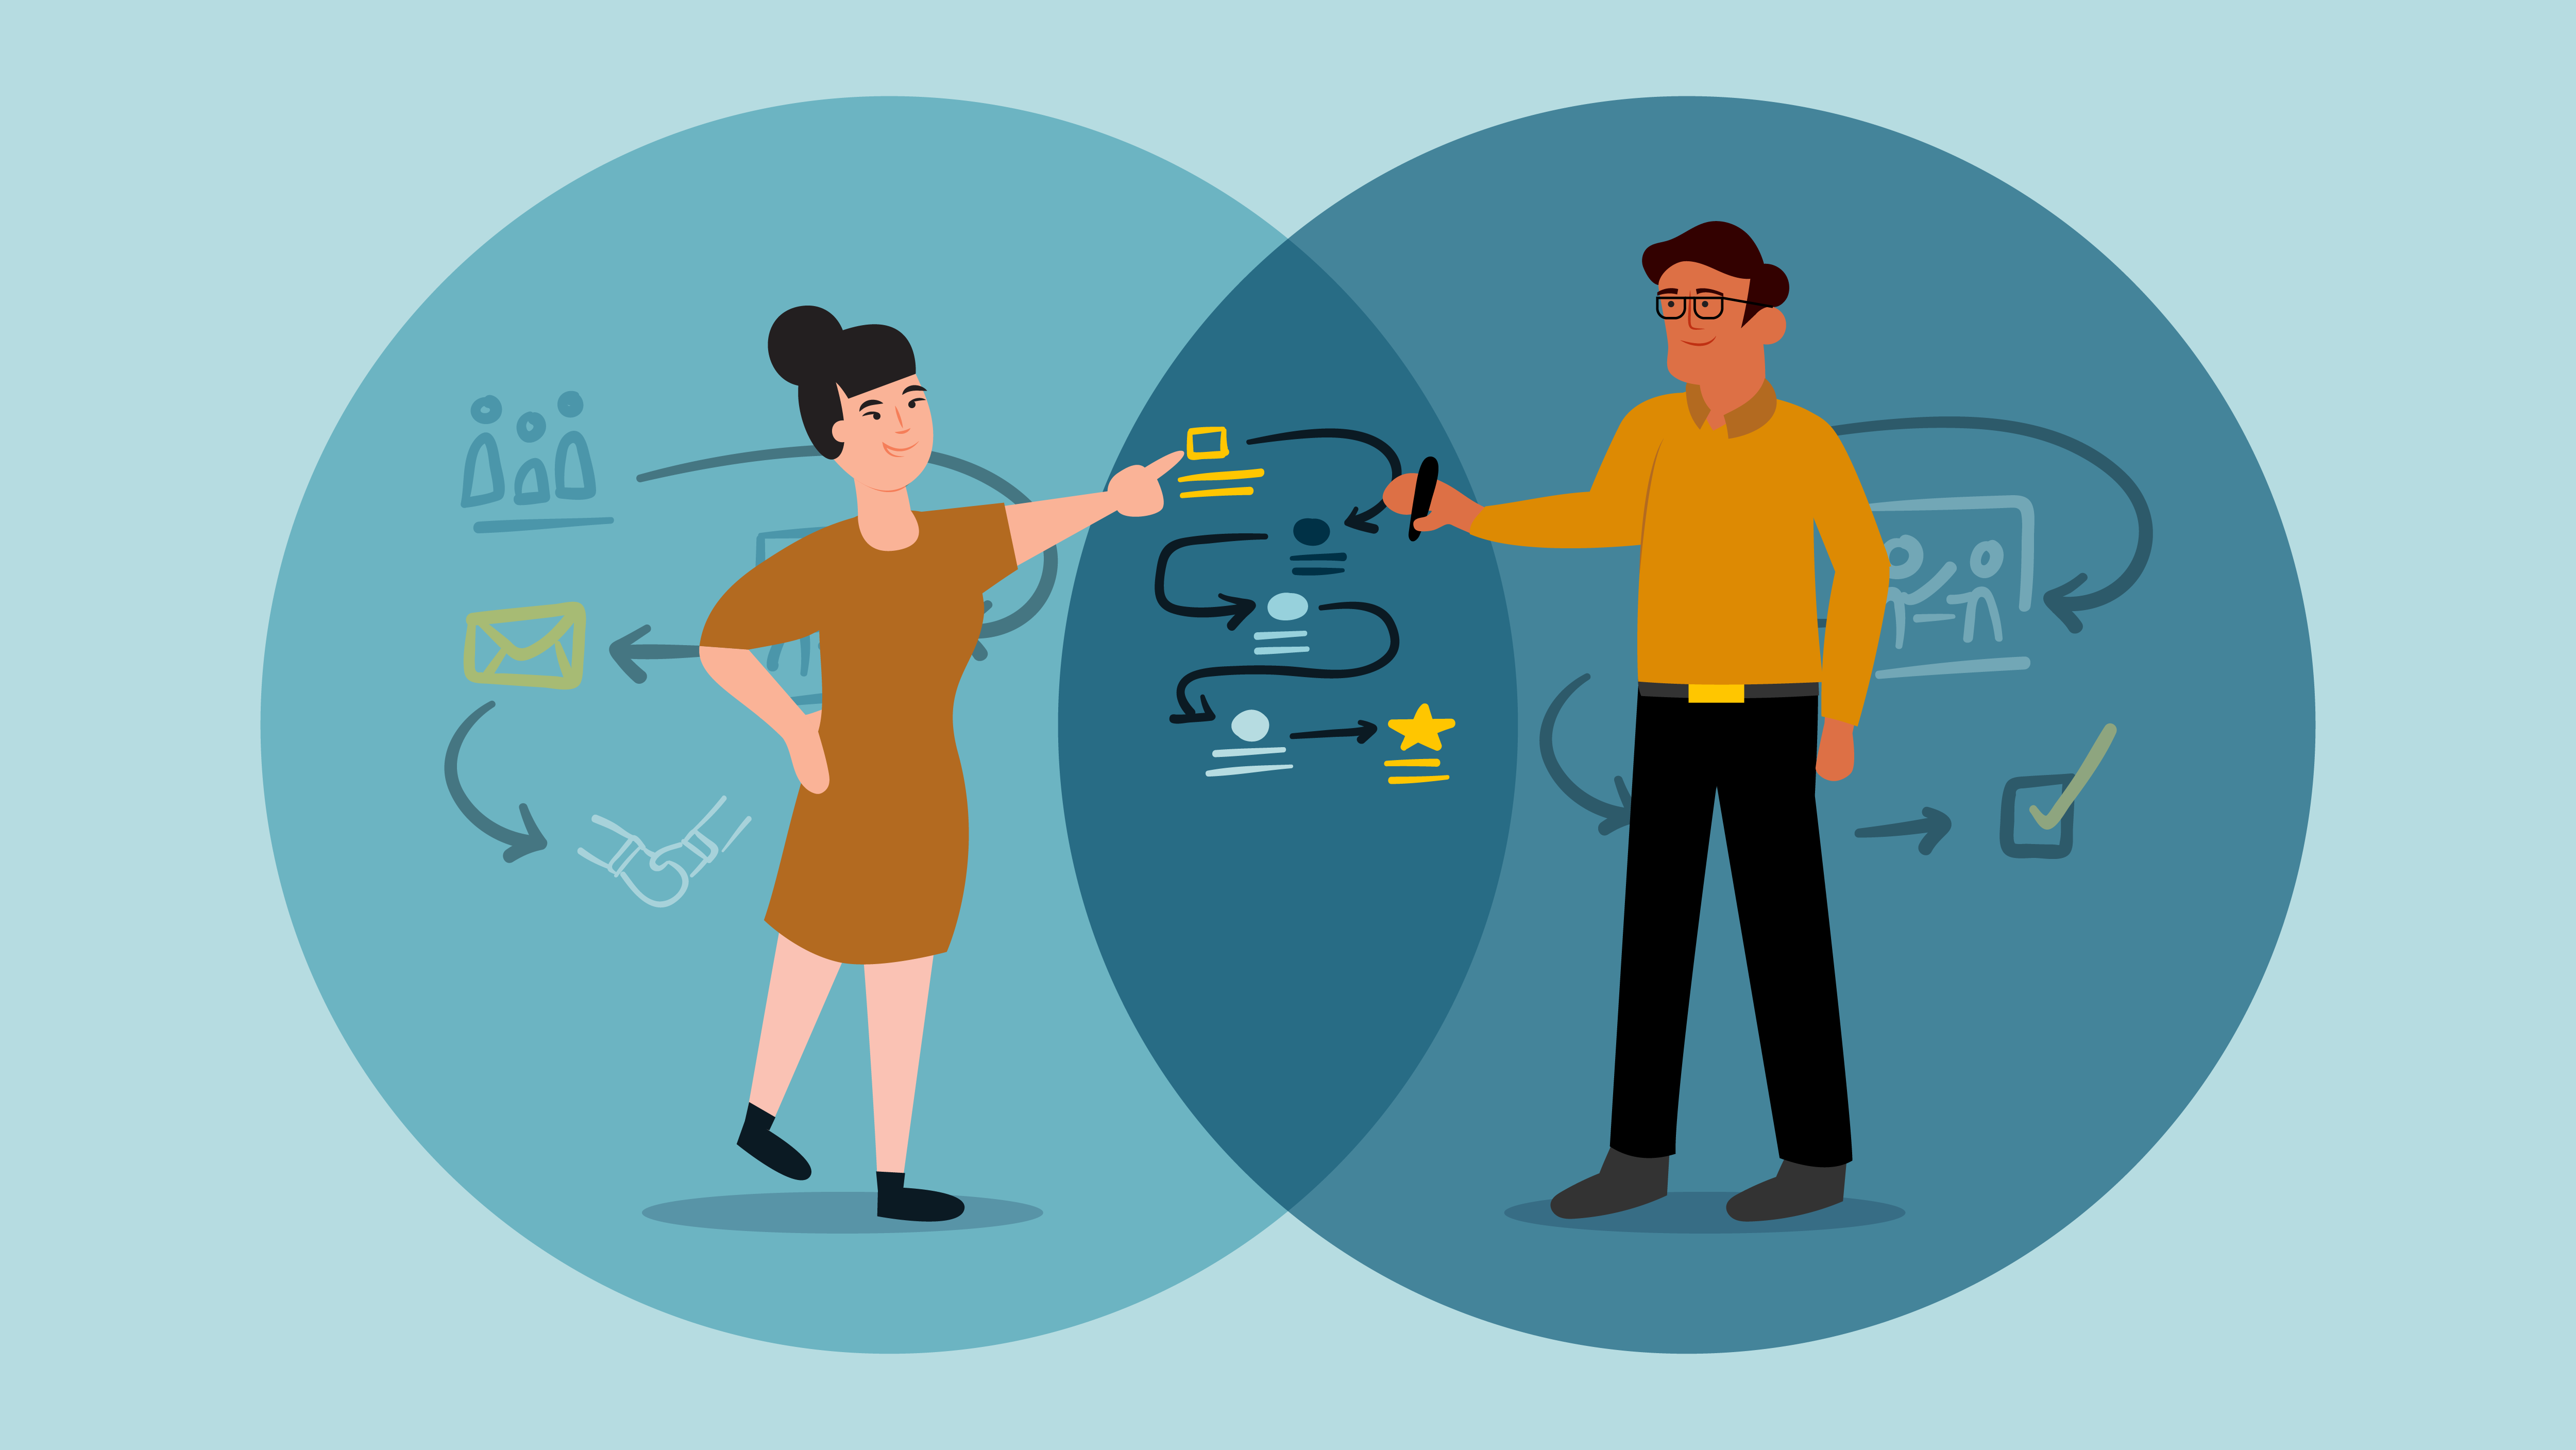 Header image features a blue Venn diagram with a man and a woman in front of doodles of systems, pointing at a shared visual system they’re drawing and discussing together. Against a light blue background.